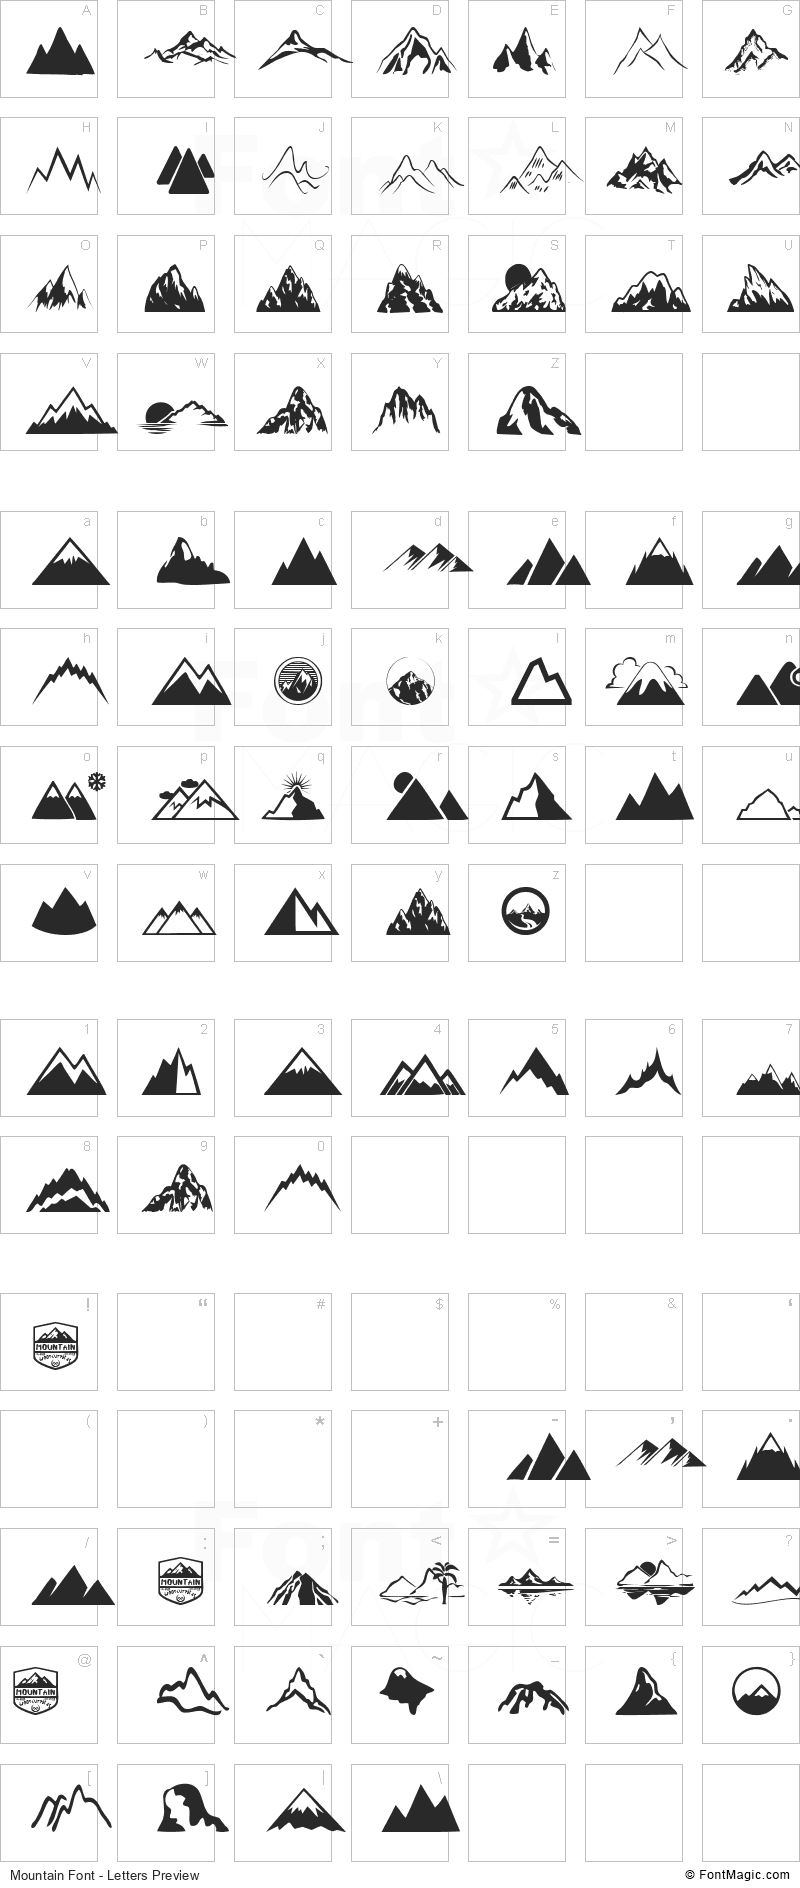 Mountain Font - All Latters Preview Chart